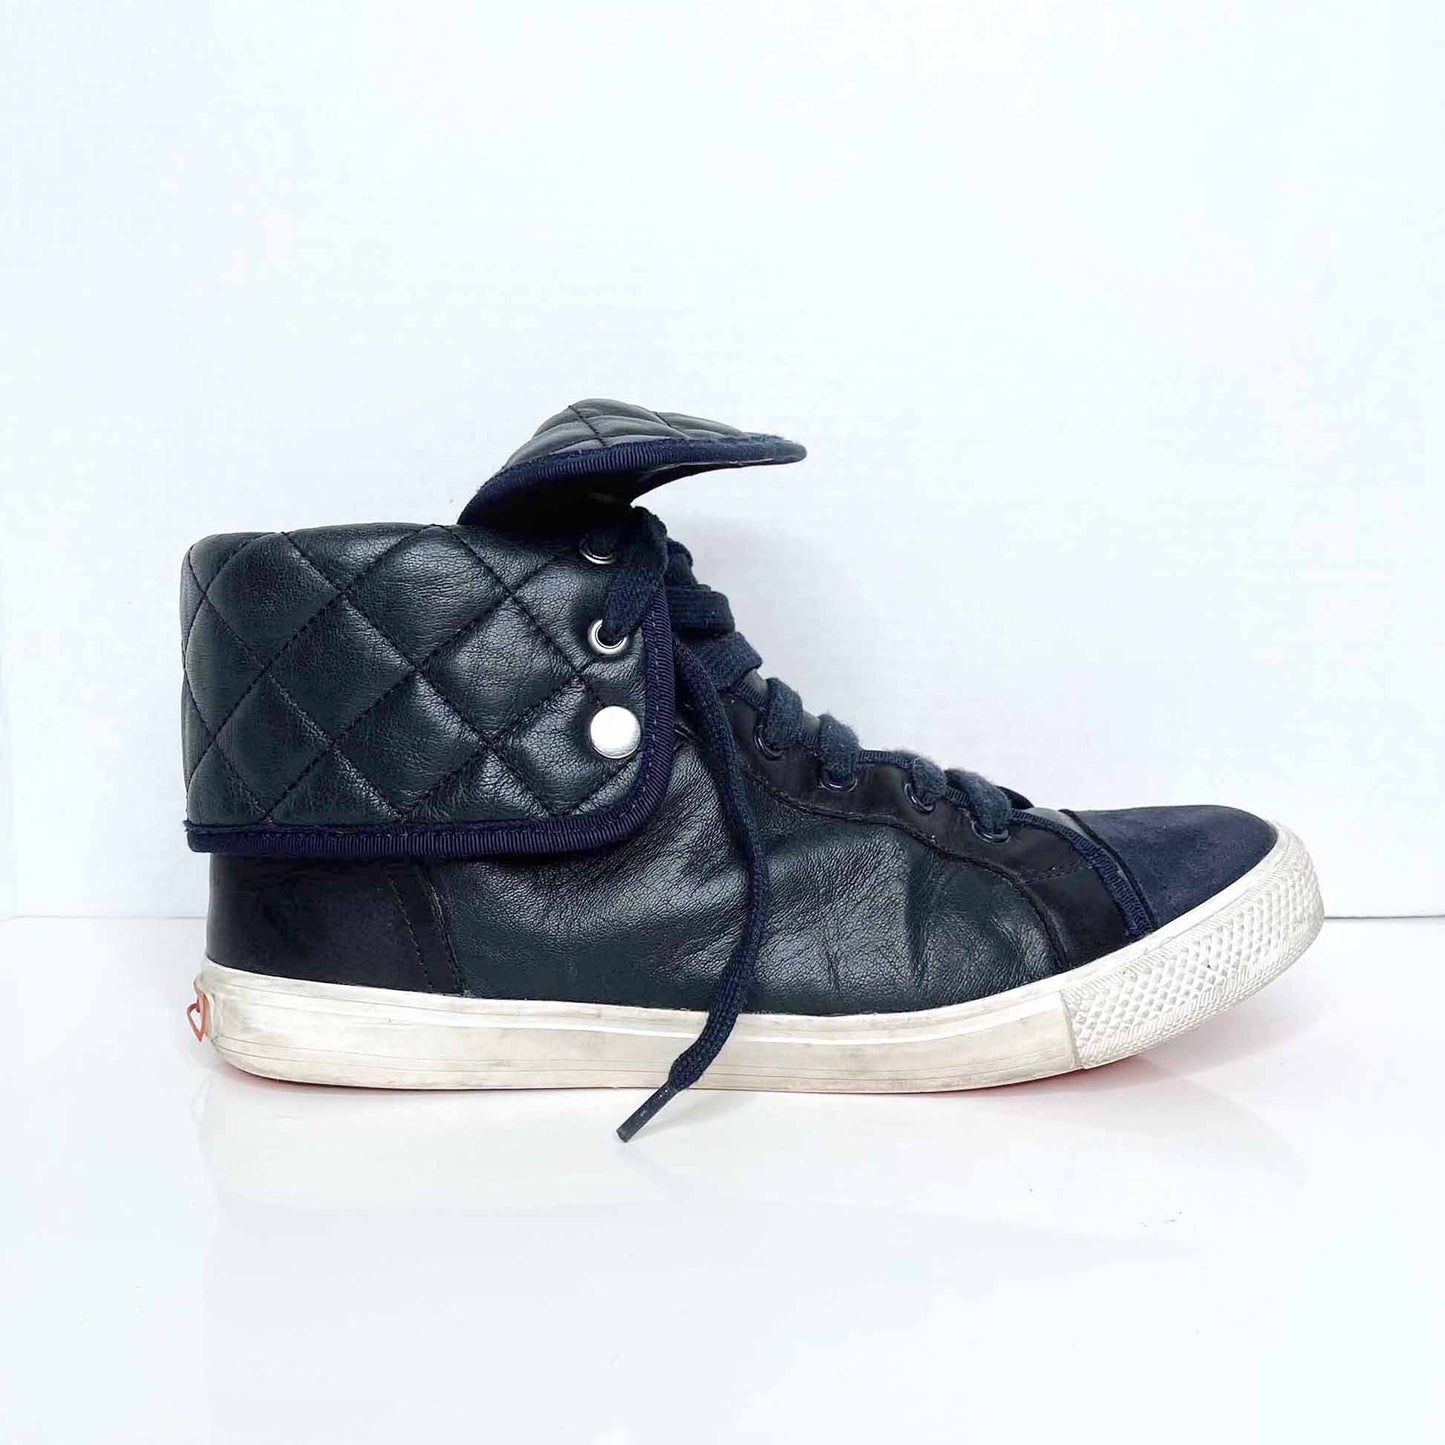 tory burch high top fold over leather sneakers - size 10